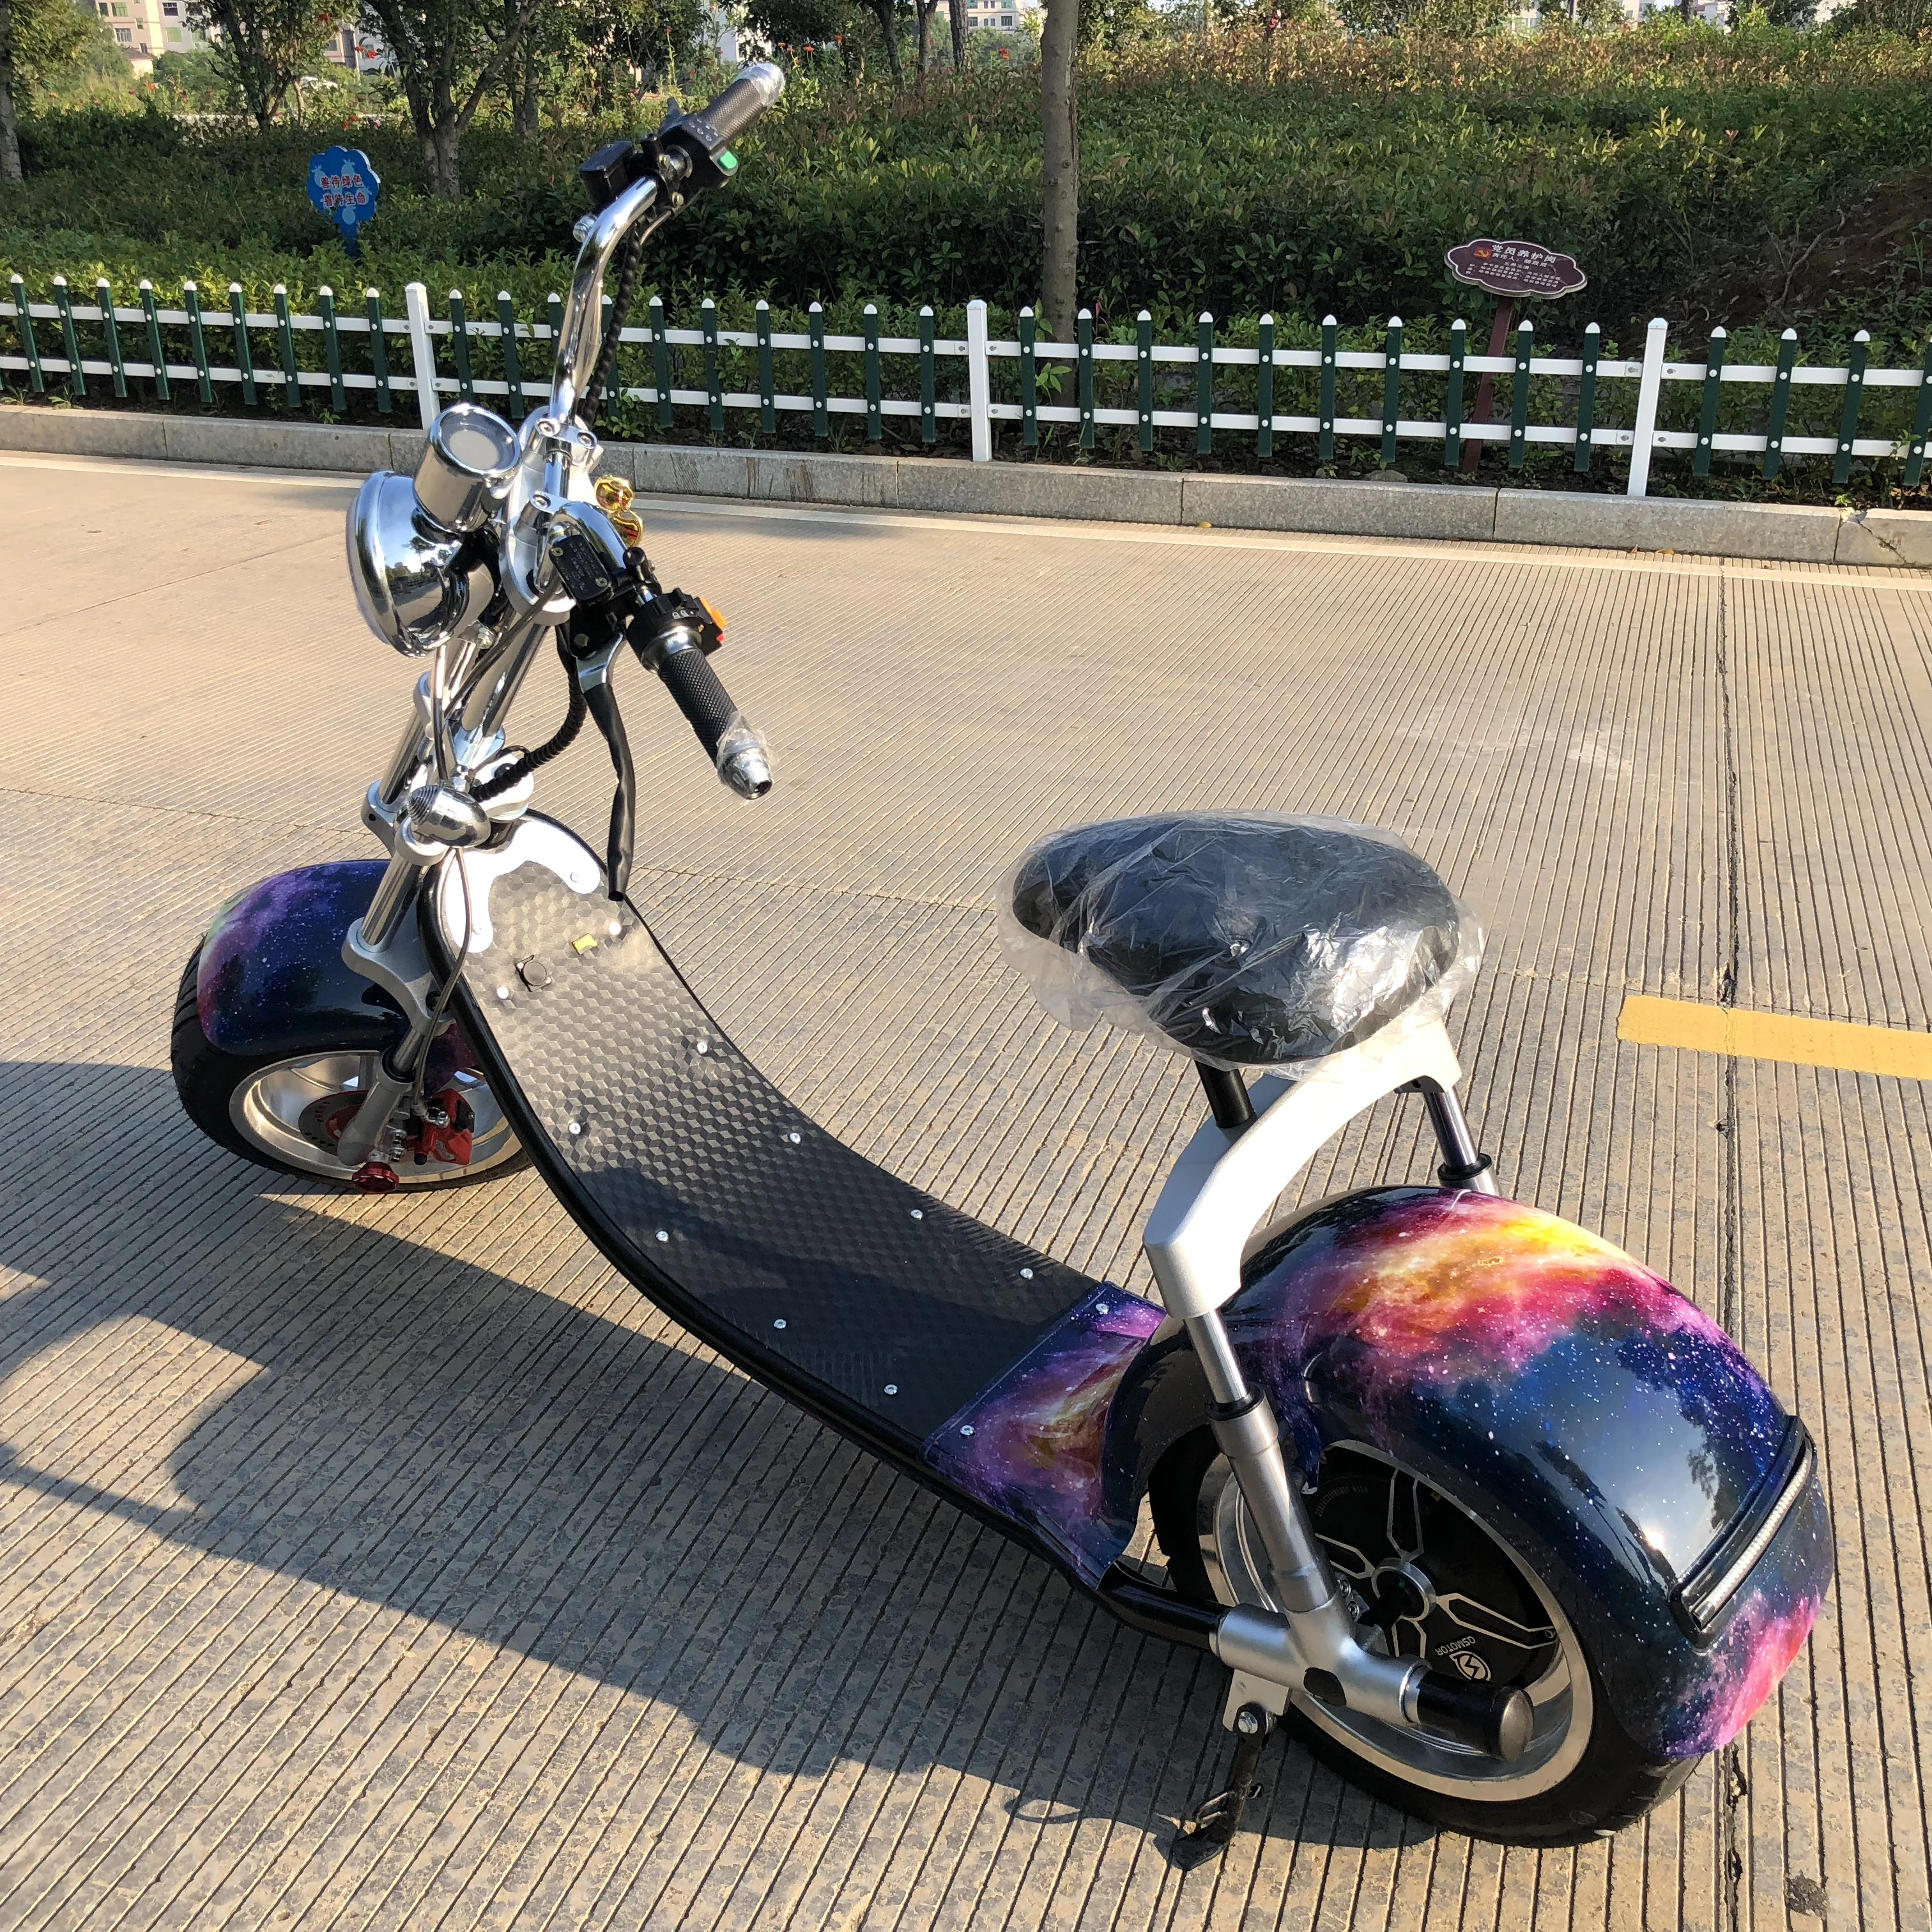 50cc motorcycle,gas scooter,cheap electric motorcycle,scooter